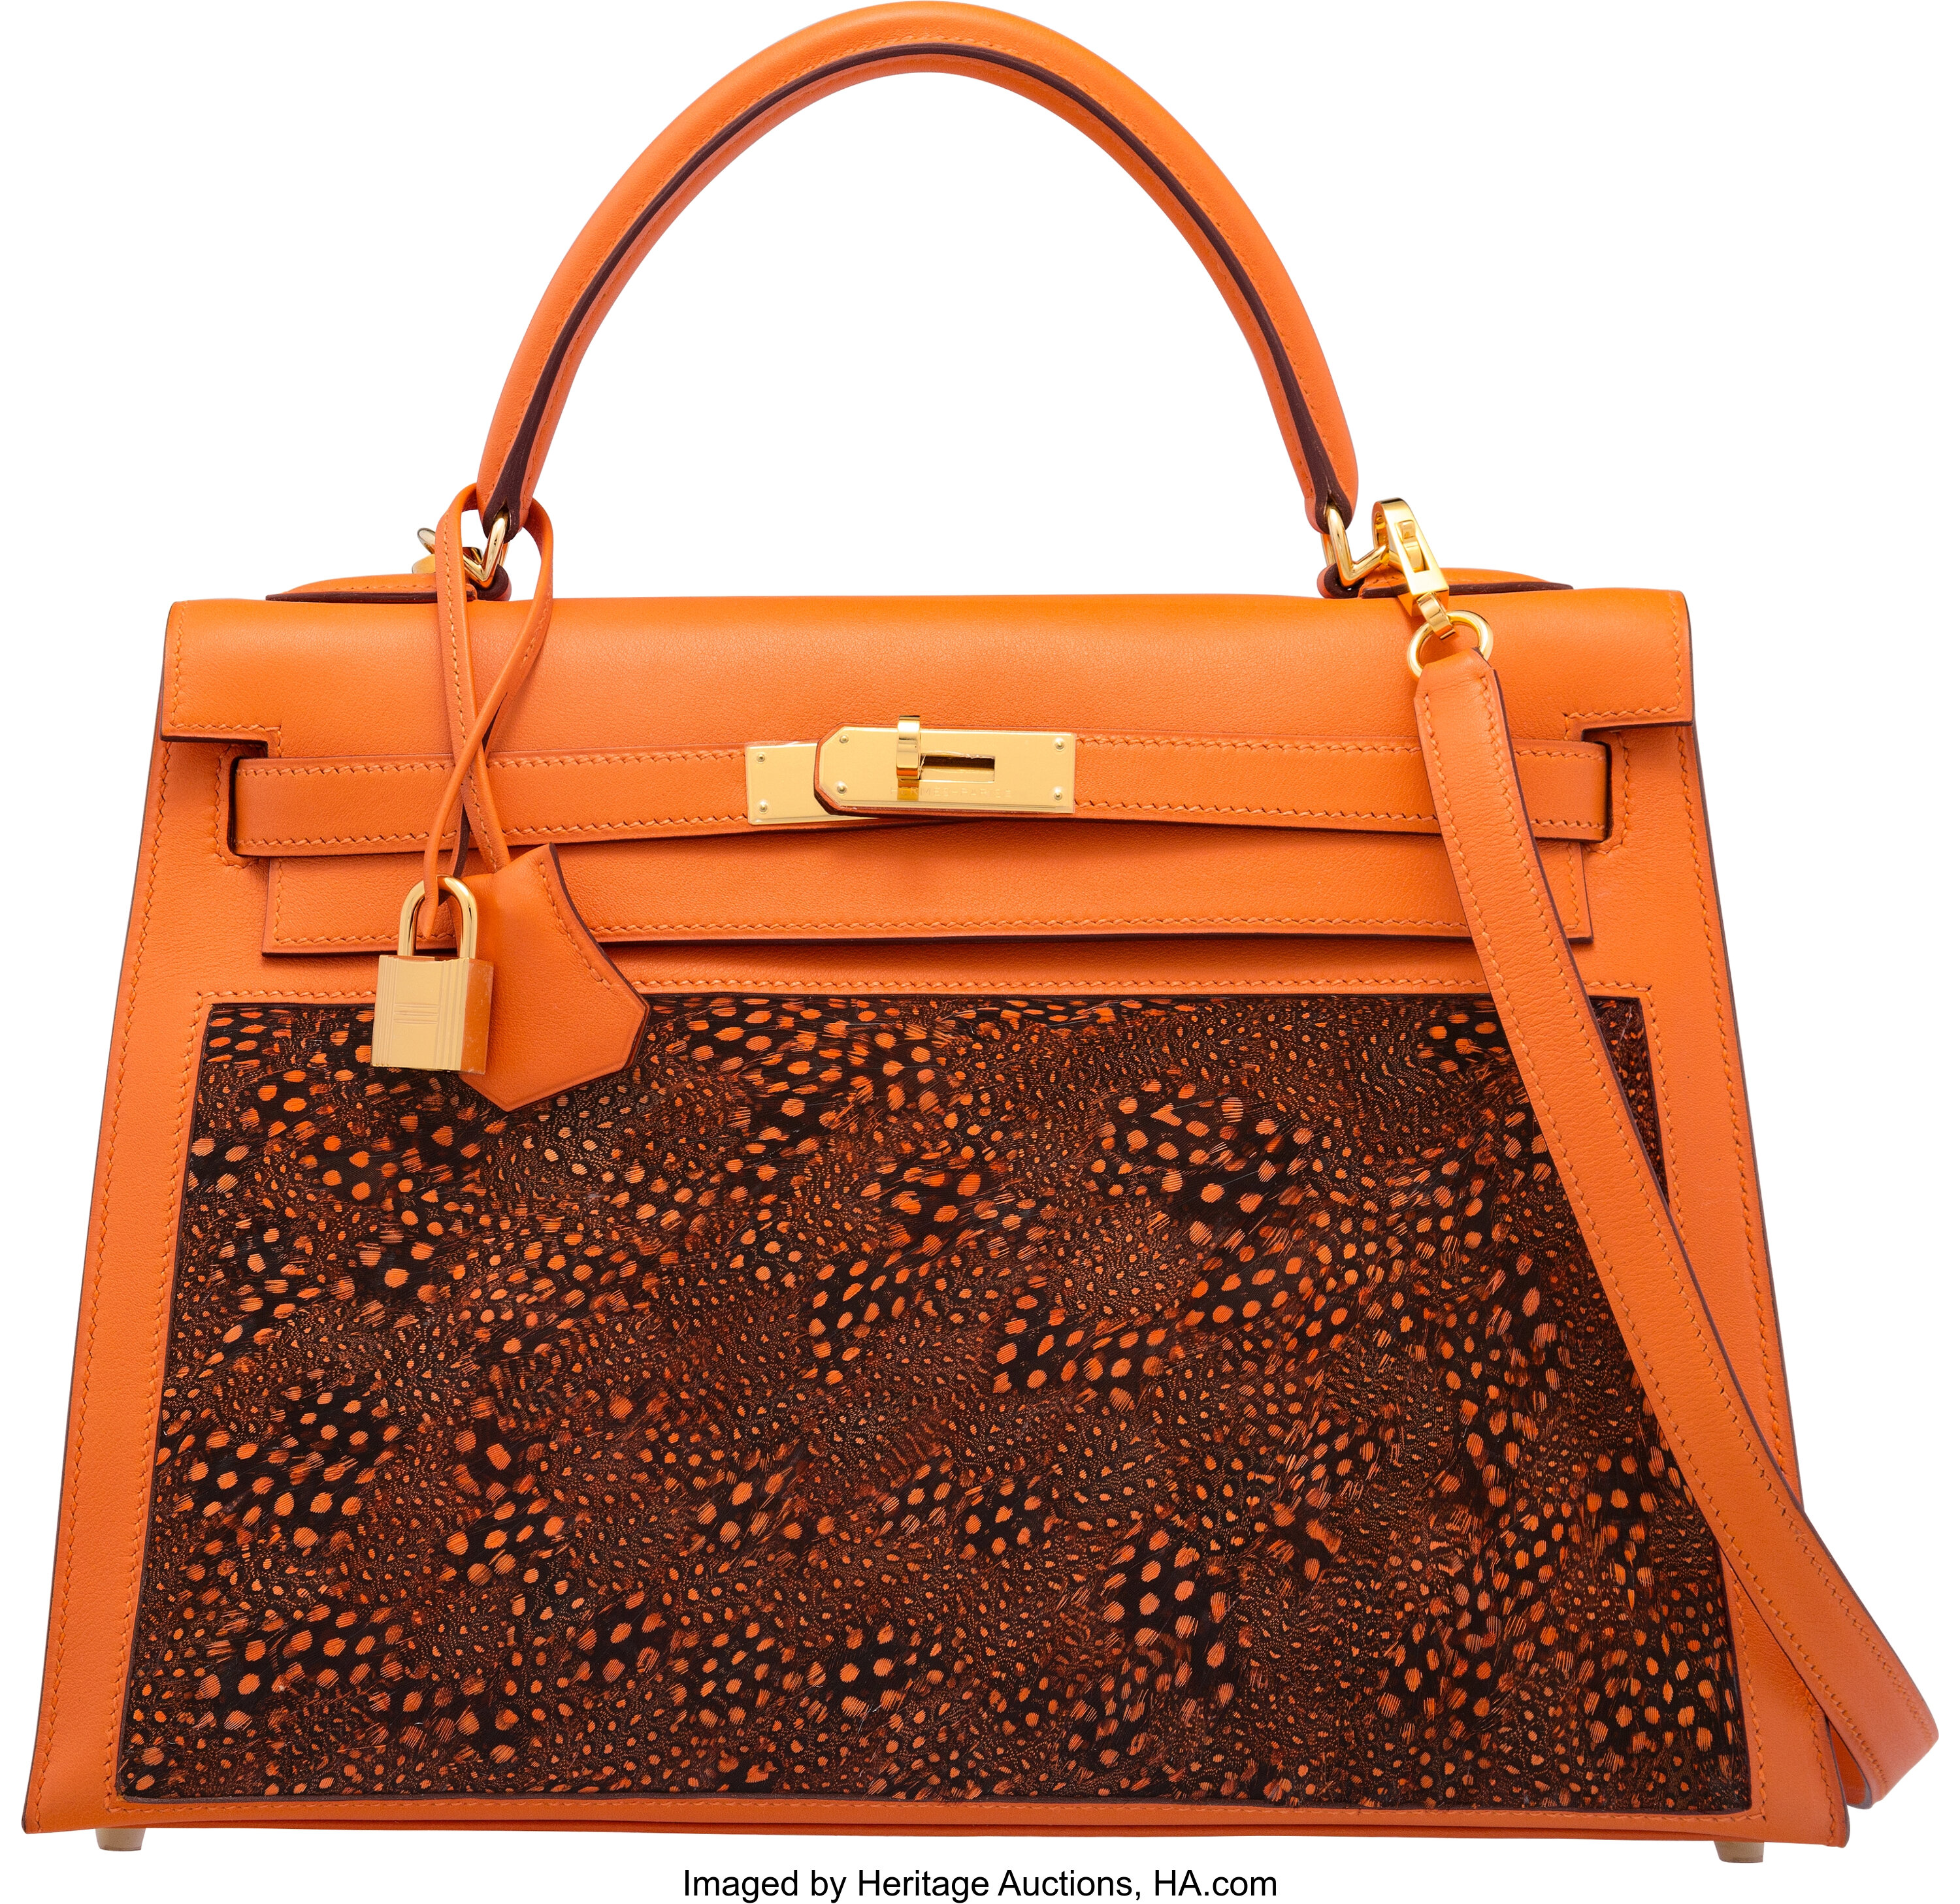 Authentic HERMES Cabasellier By color 31cm 083723CA Bag #260-004